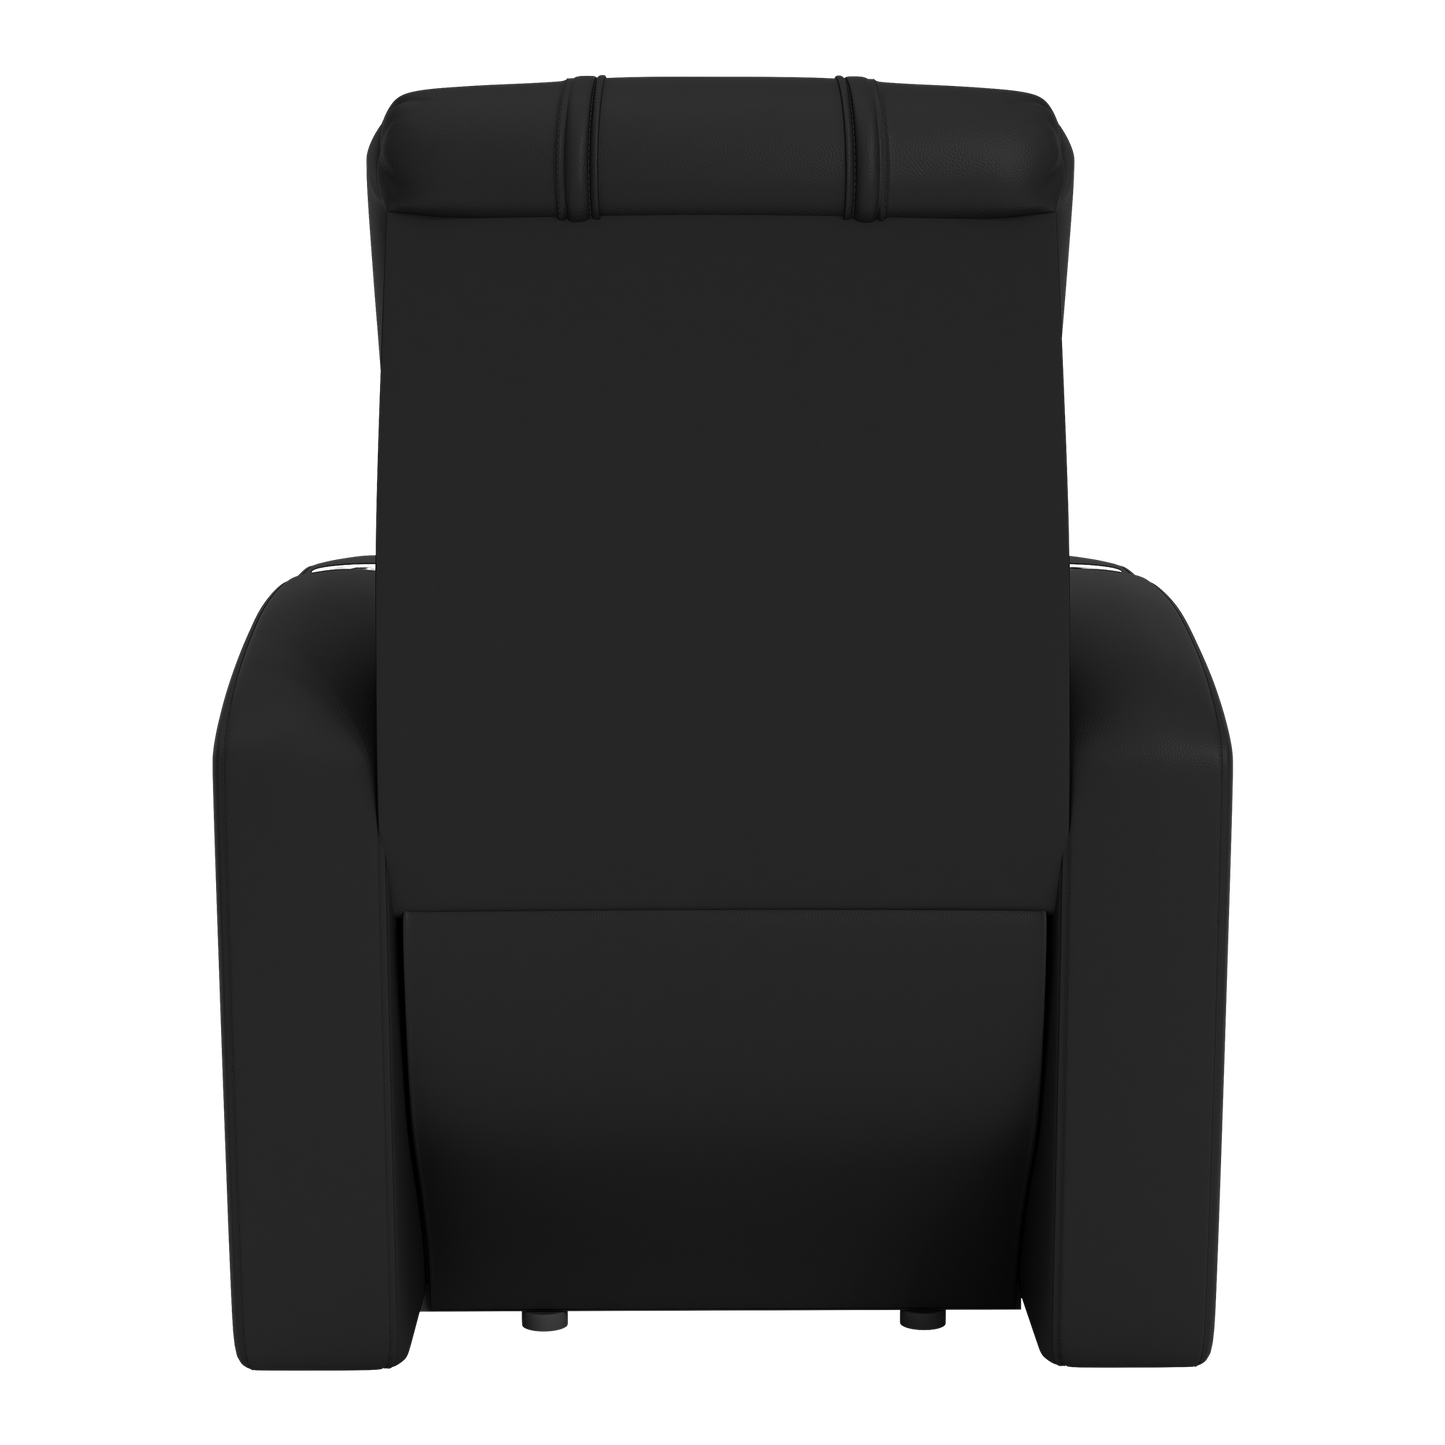 Stealth Recliner with Texas A&M Aggies Primary Logo